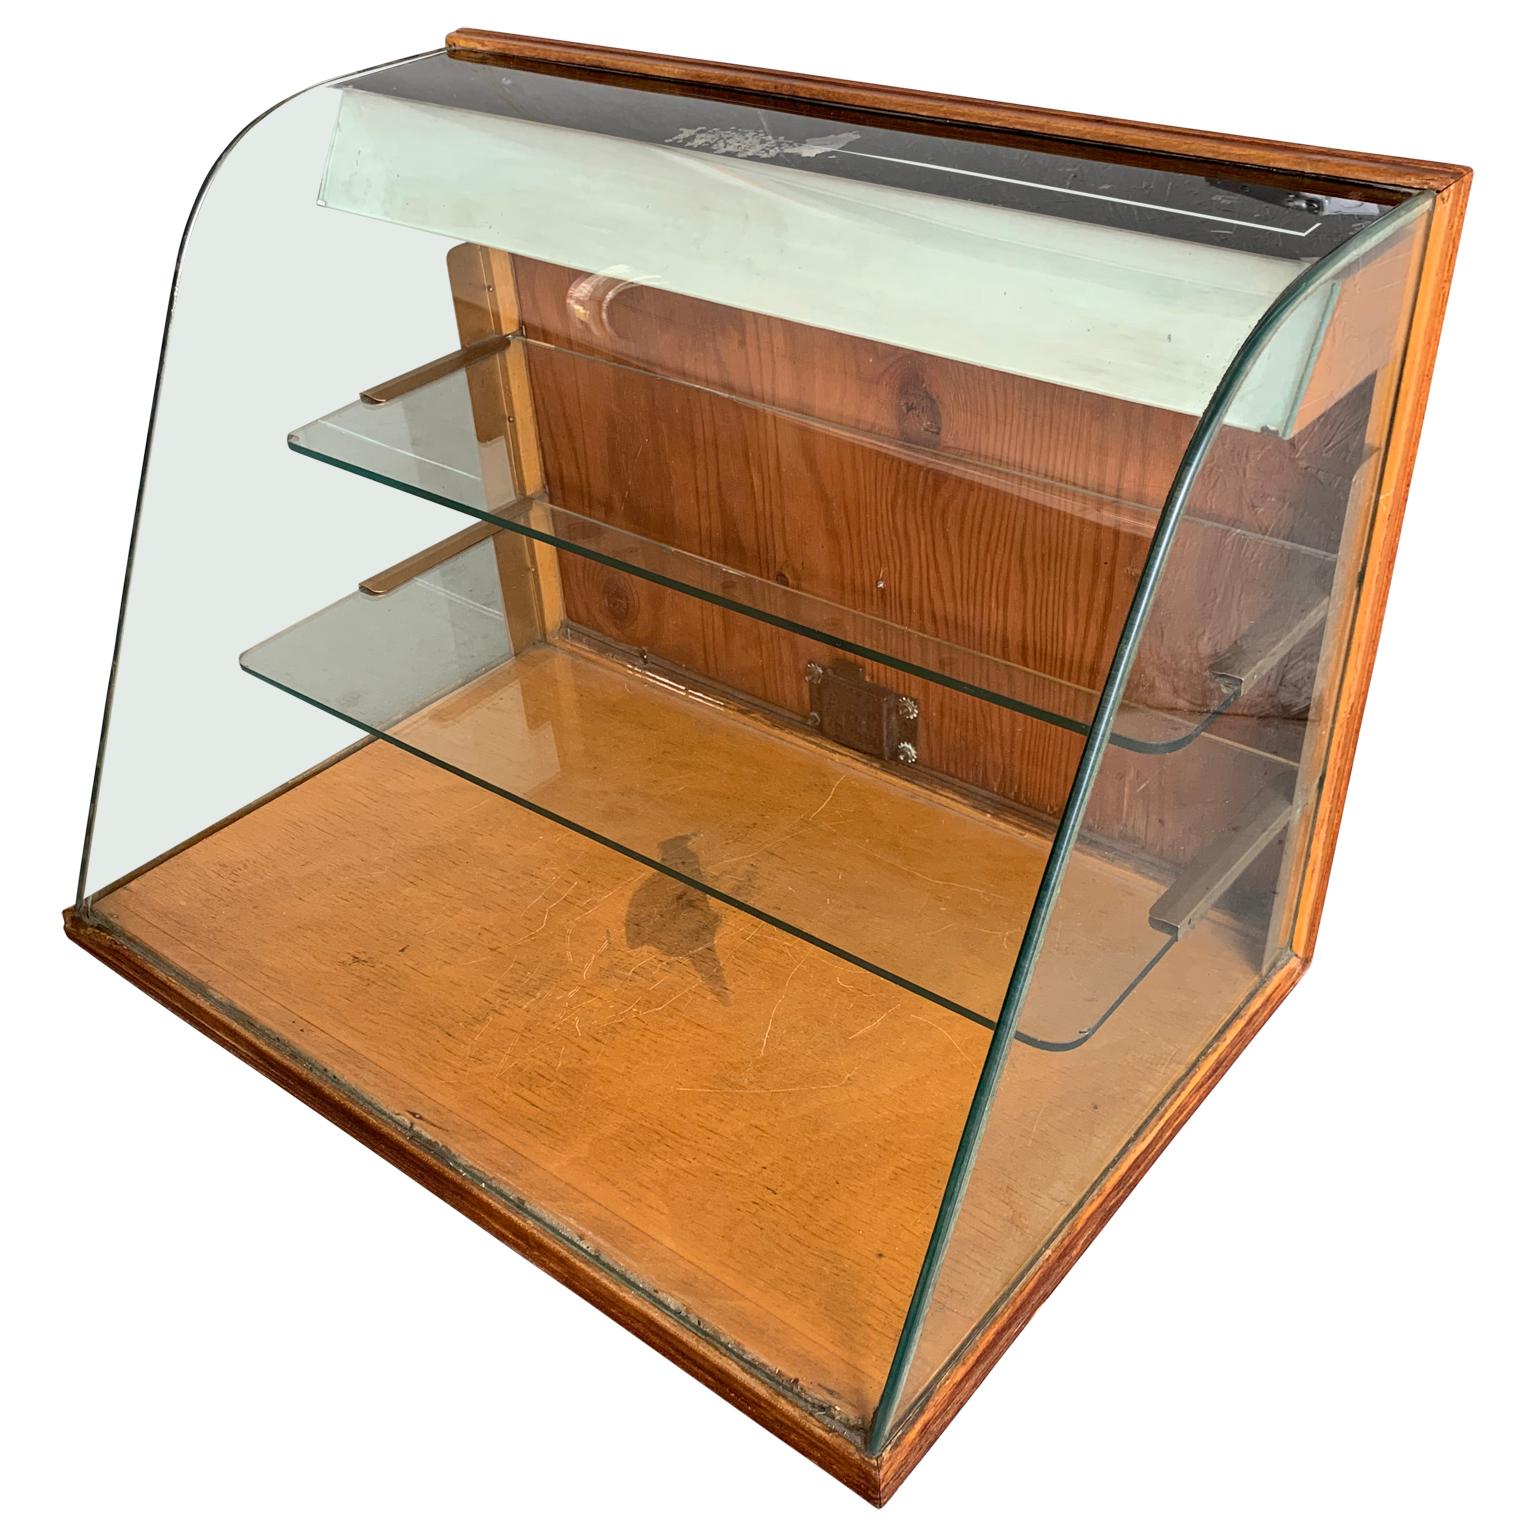 Small Early American Vintage Two-Tier Tabletop Shop Display Case